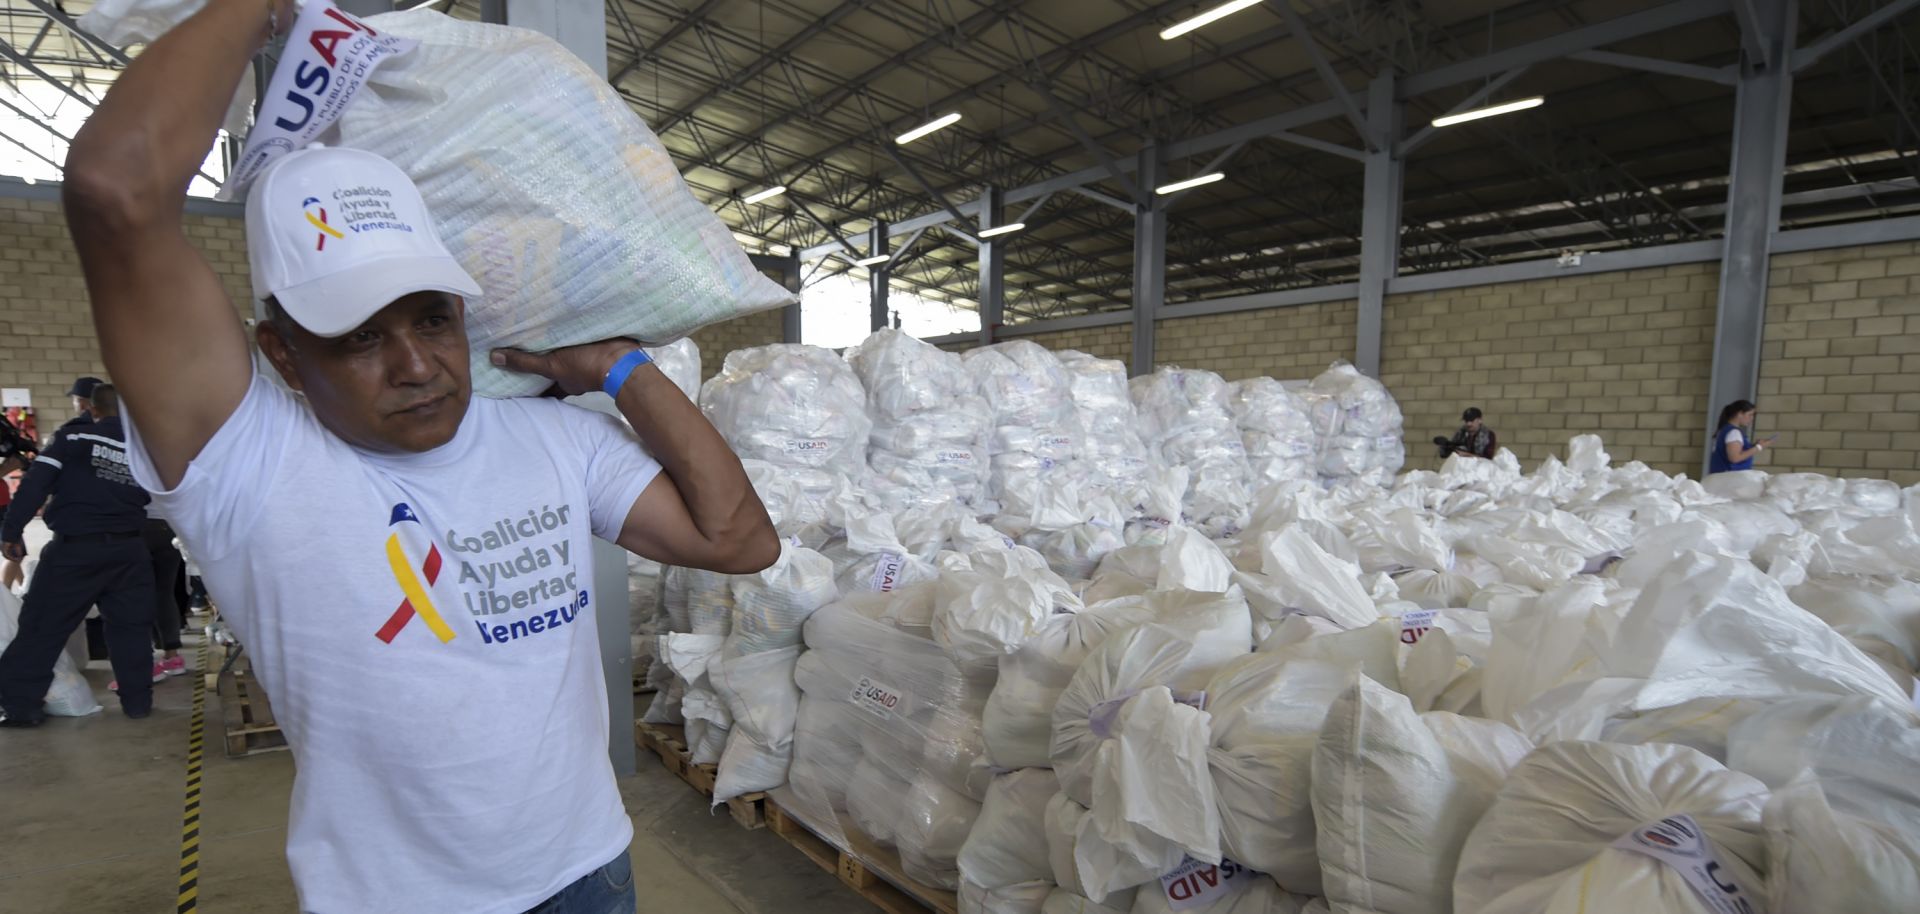 A volunteer helps stage U.S. humanitarian aid goods in Cucuta, Colombia, in preparation for an attempt to deliver them to Venezuela on Feb. 23.